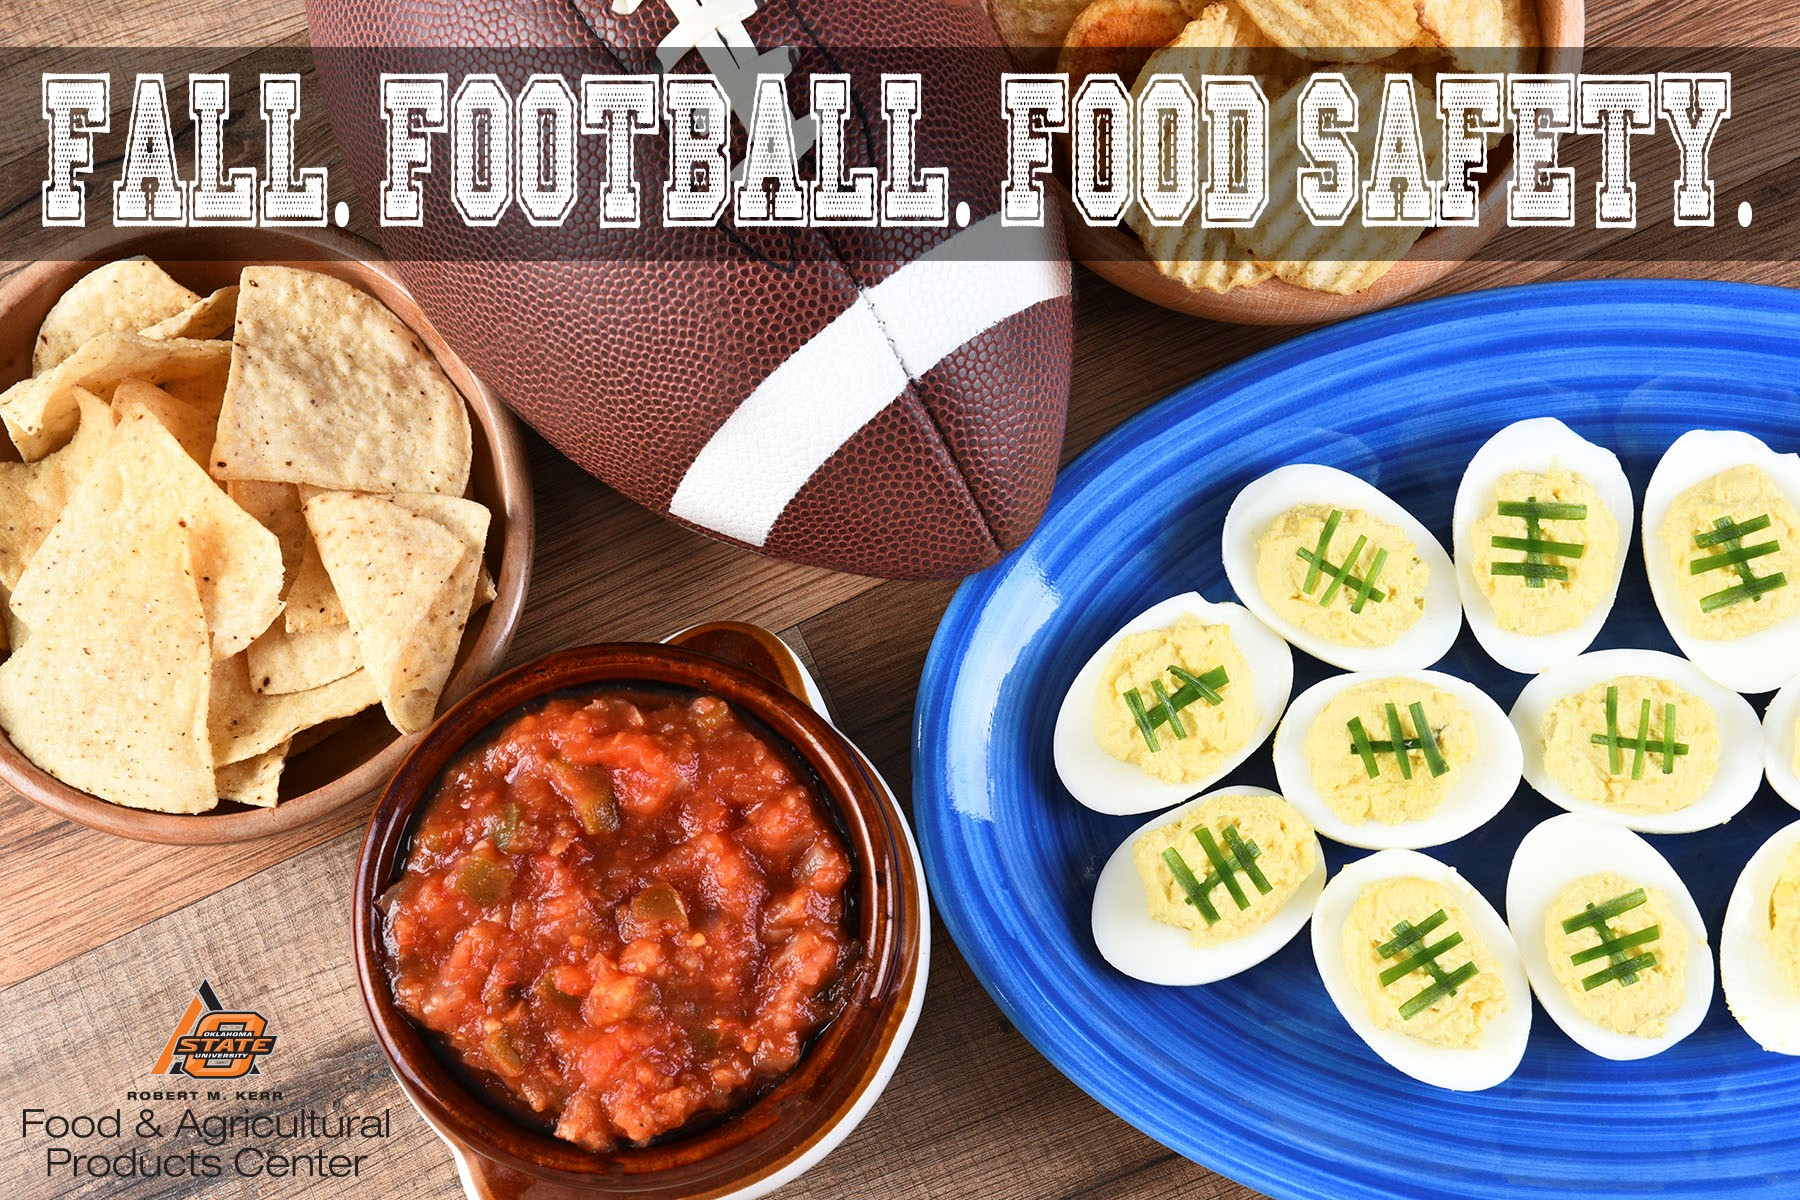 OSU's Food & Agricultural Products Center Offers Tips to Tackle Food Safety During Tailgate Season